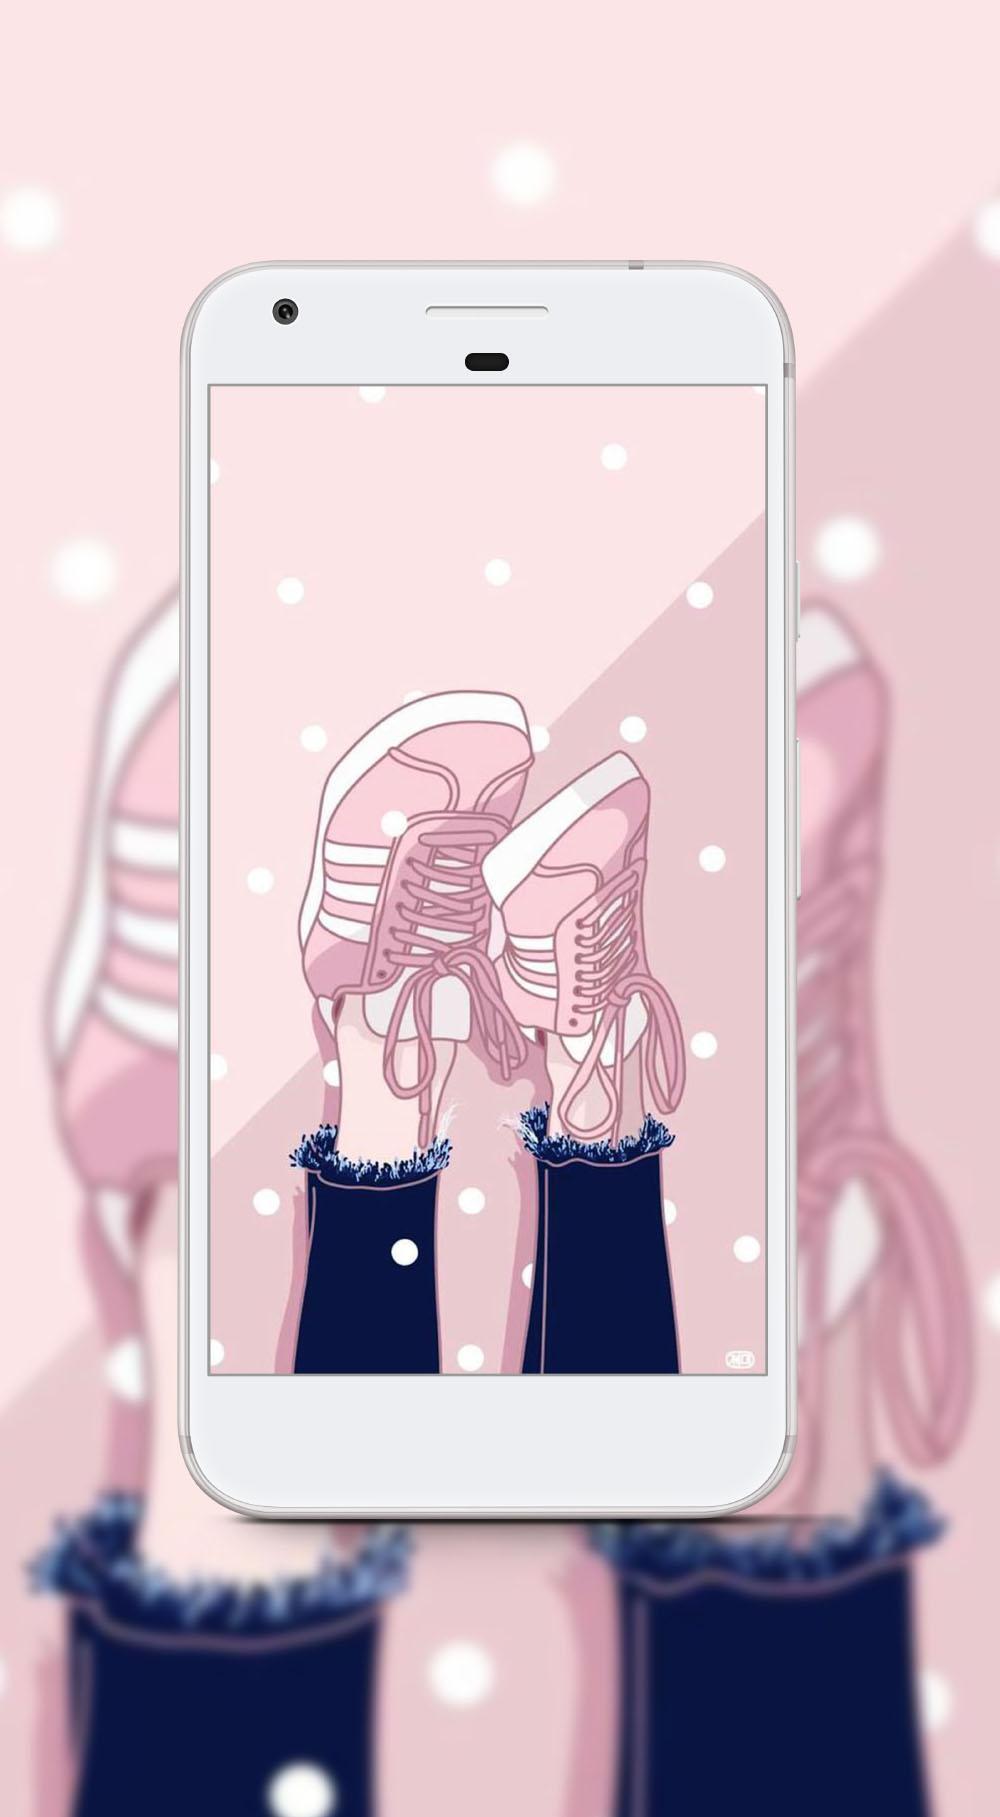 Girly Dan Friendship Wallpaper For Android APK Download